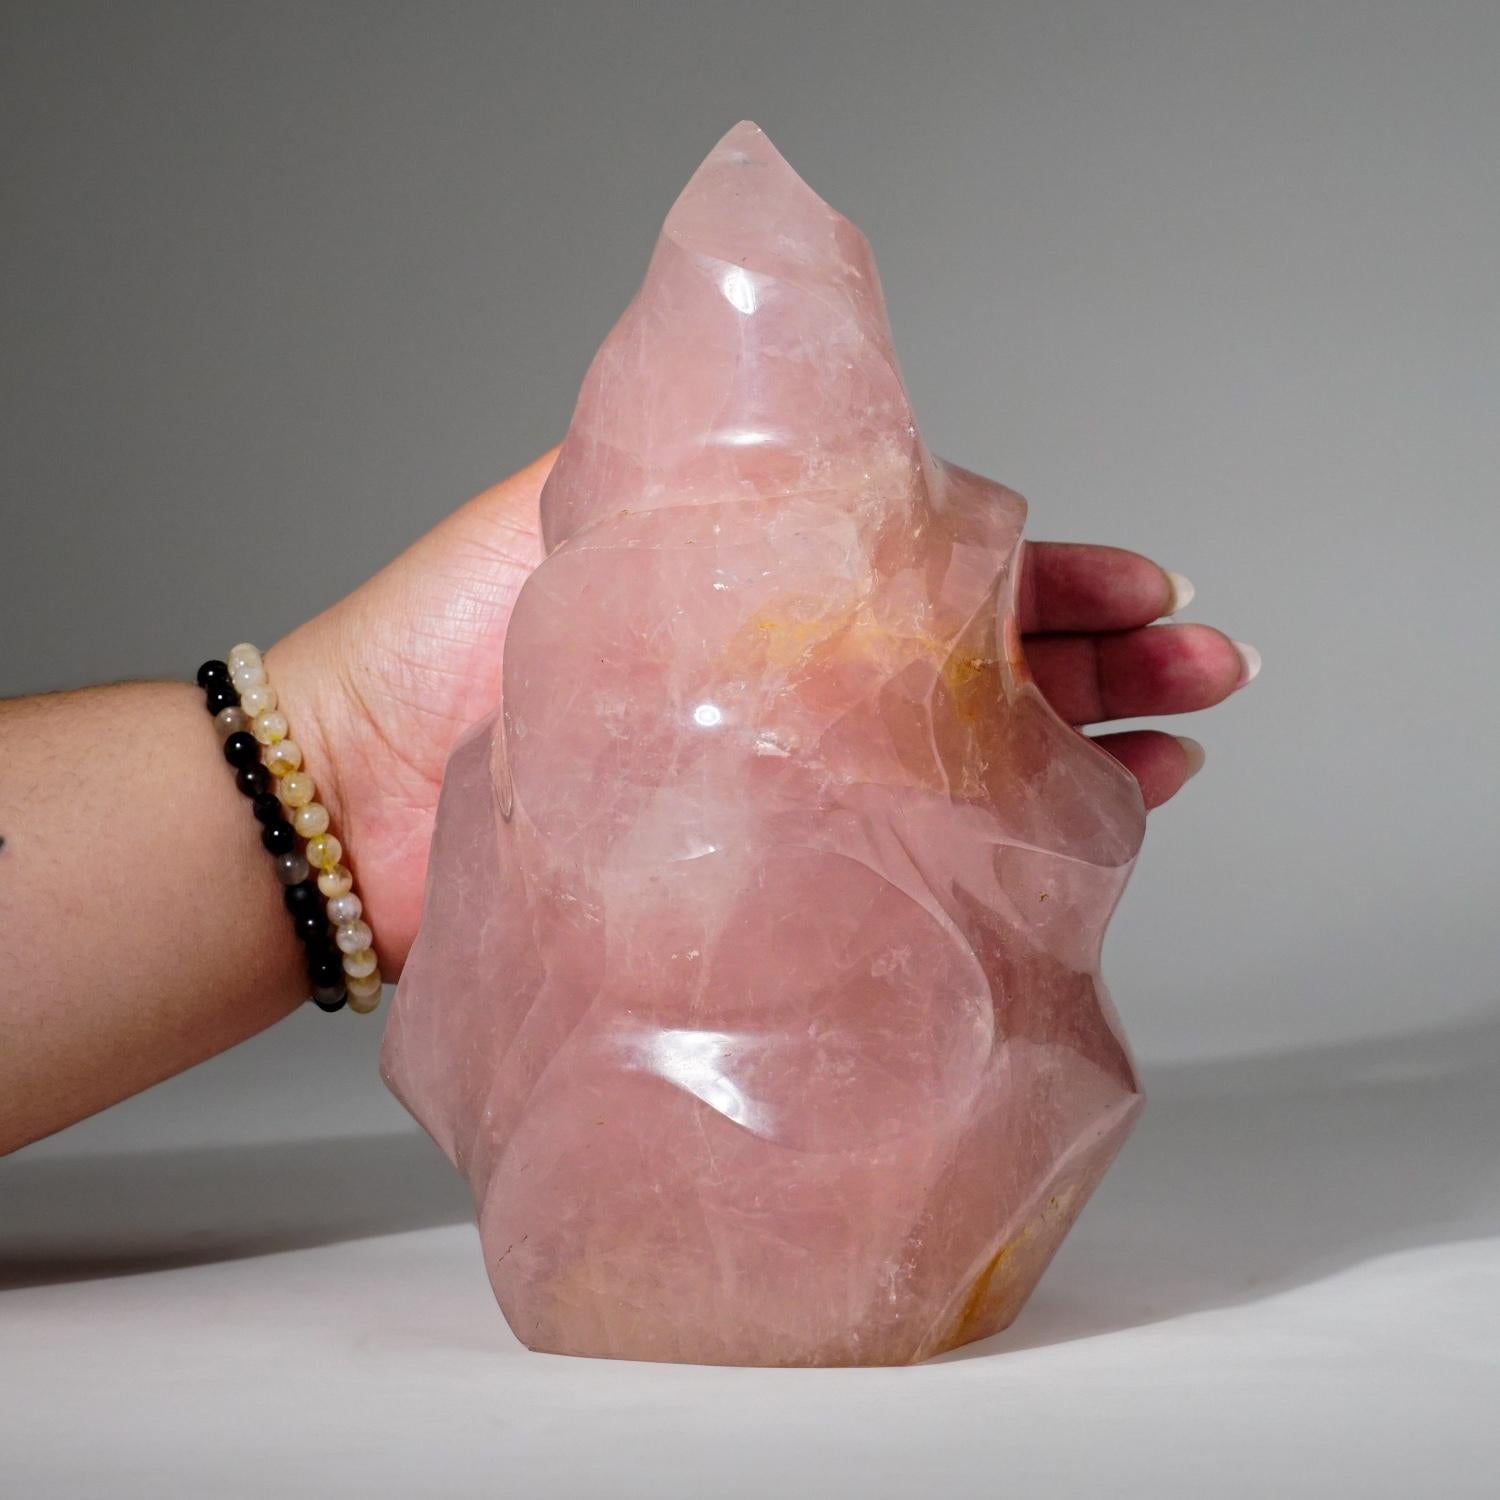 Contemporary Polished Rose Quartz Flame Freeform From Brazil (6.7 lbs) For Sale